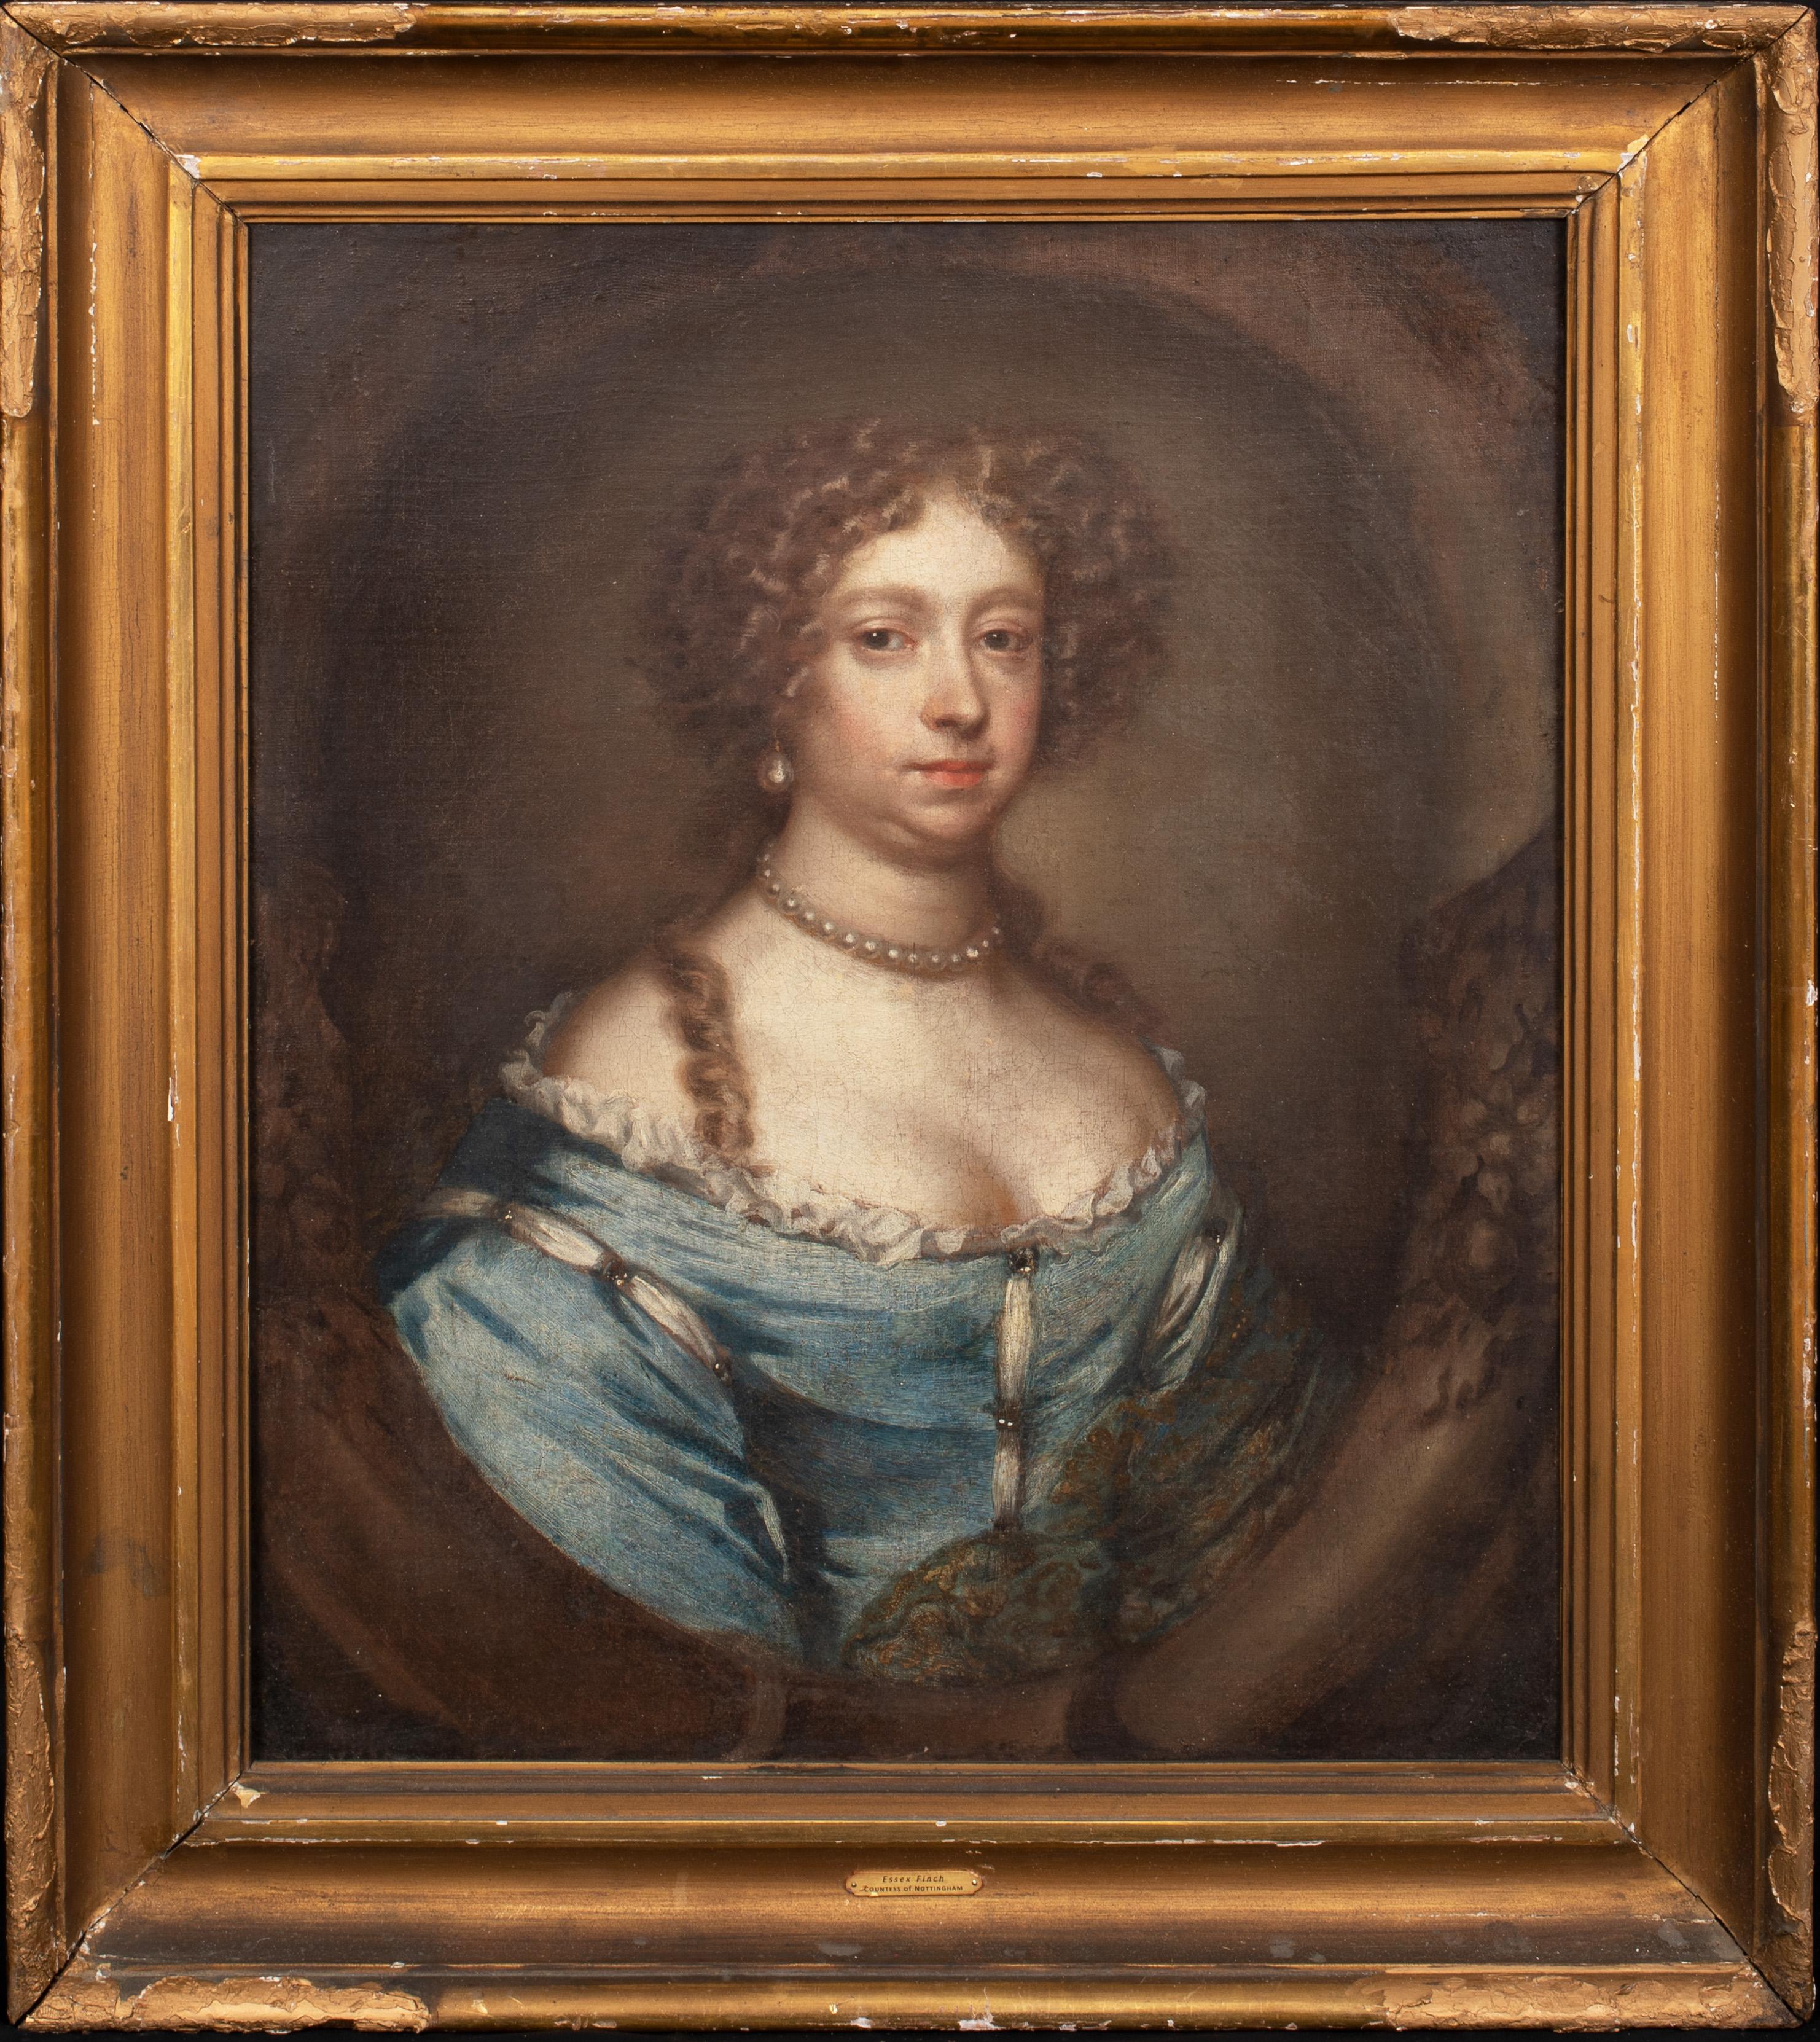 Portrait Of Essex Finch, Countess Of Nottingham, 17th Century  - Painting by Sir Peter Lely